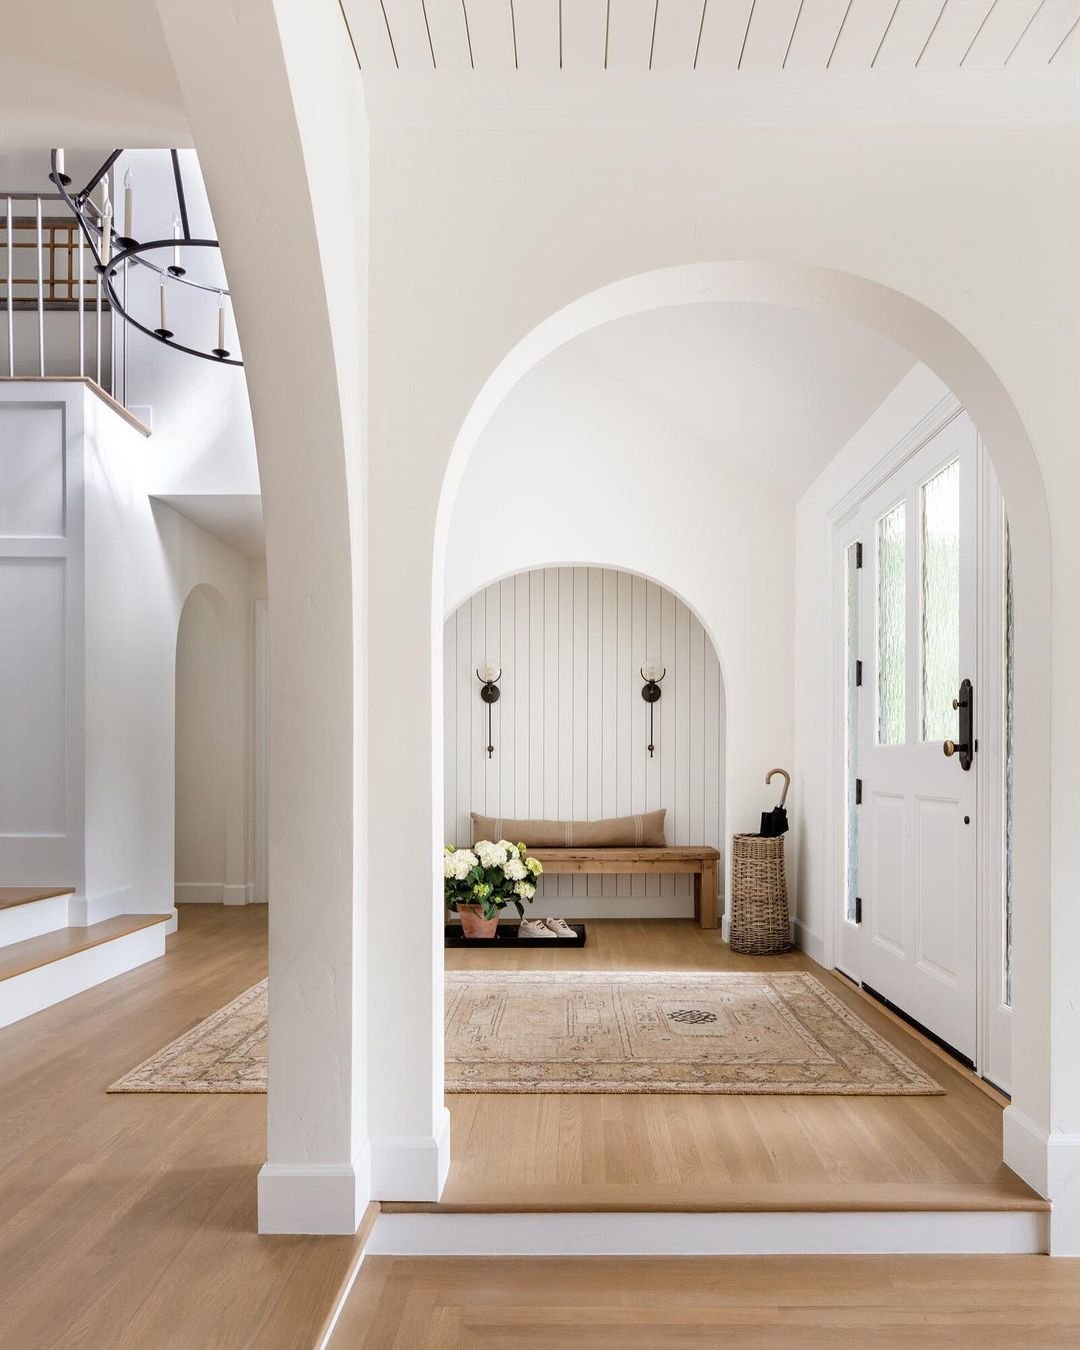 White arched doorway in house entrance.